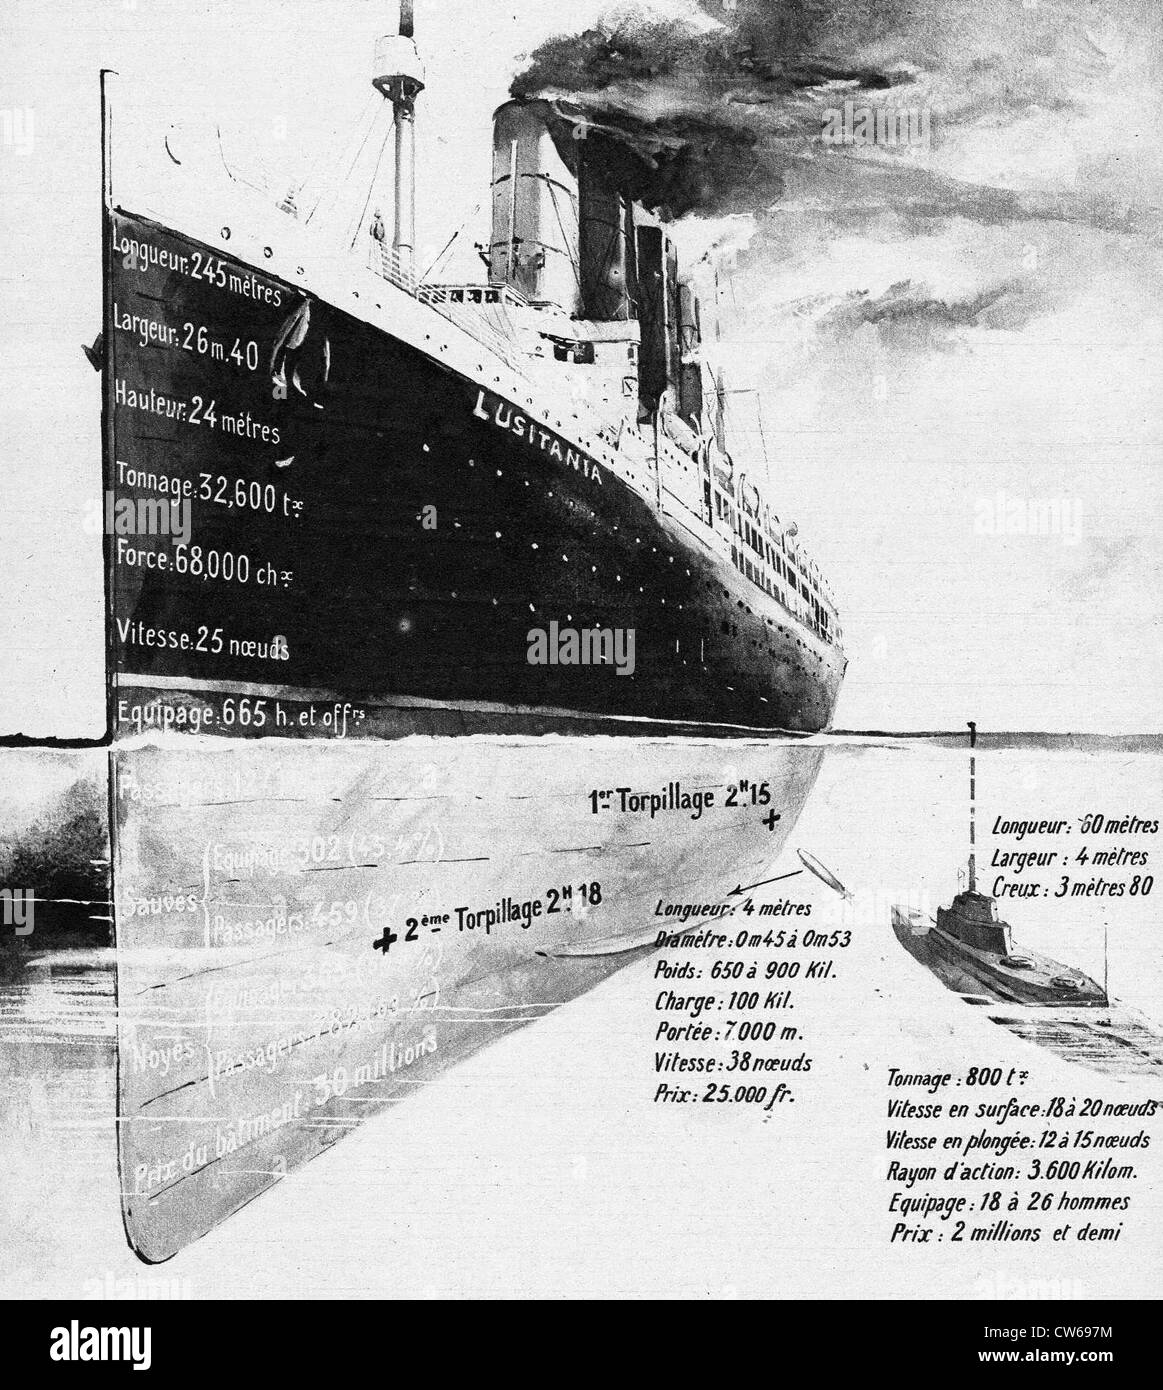 Liner Lusitania. The liner compared to the submarine and the torpedo. Stock Photo